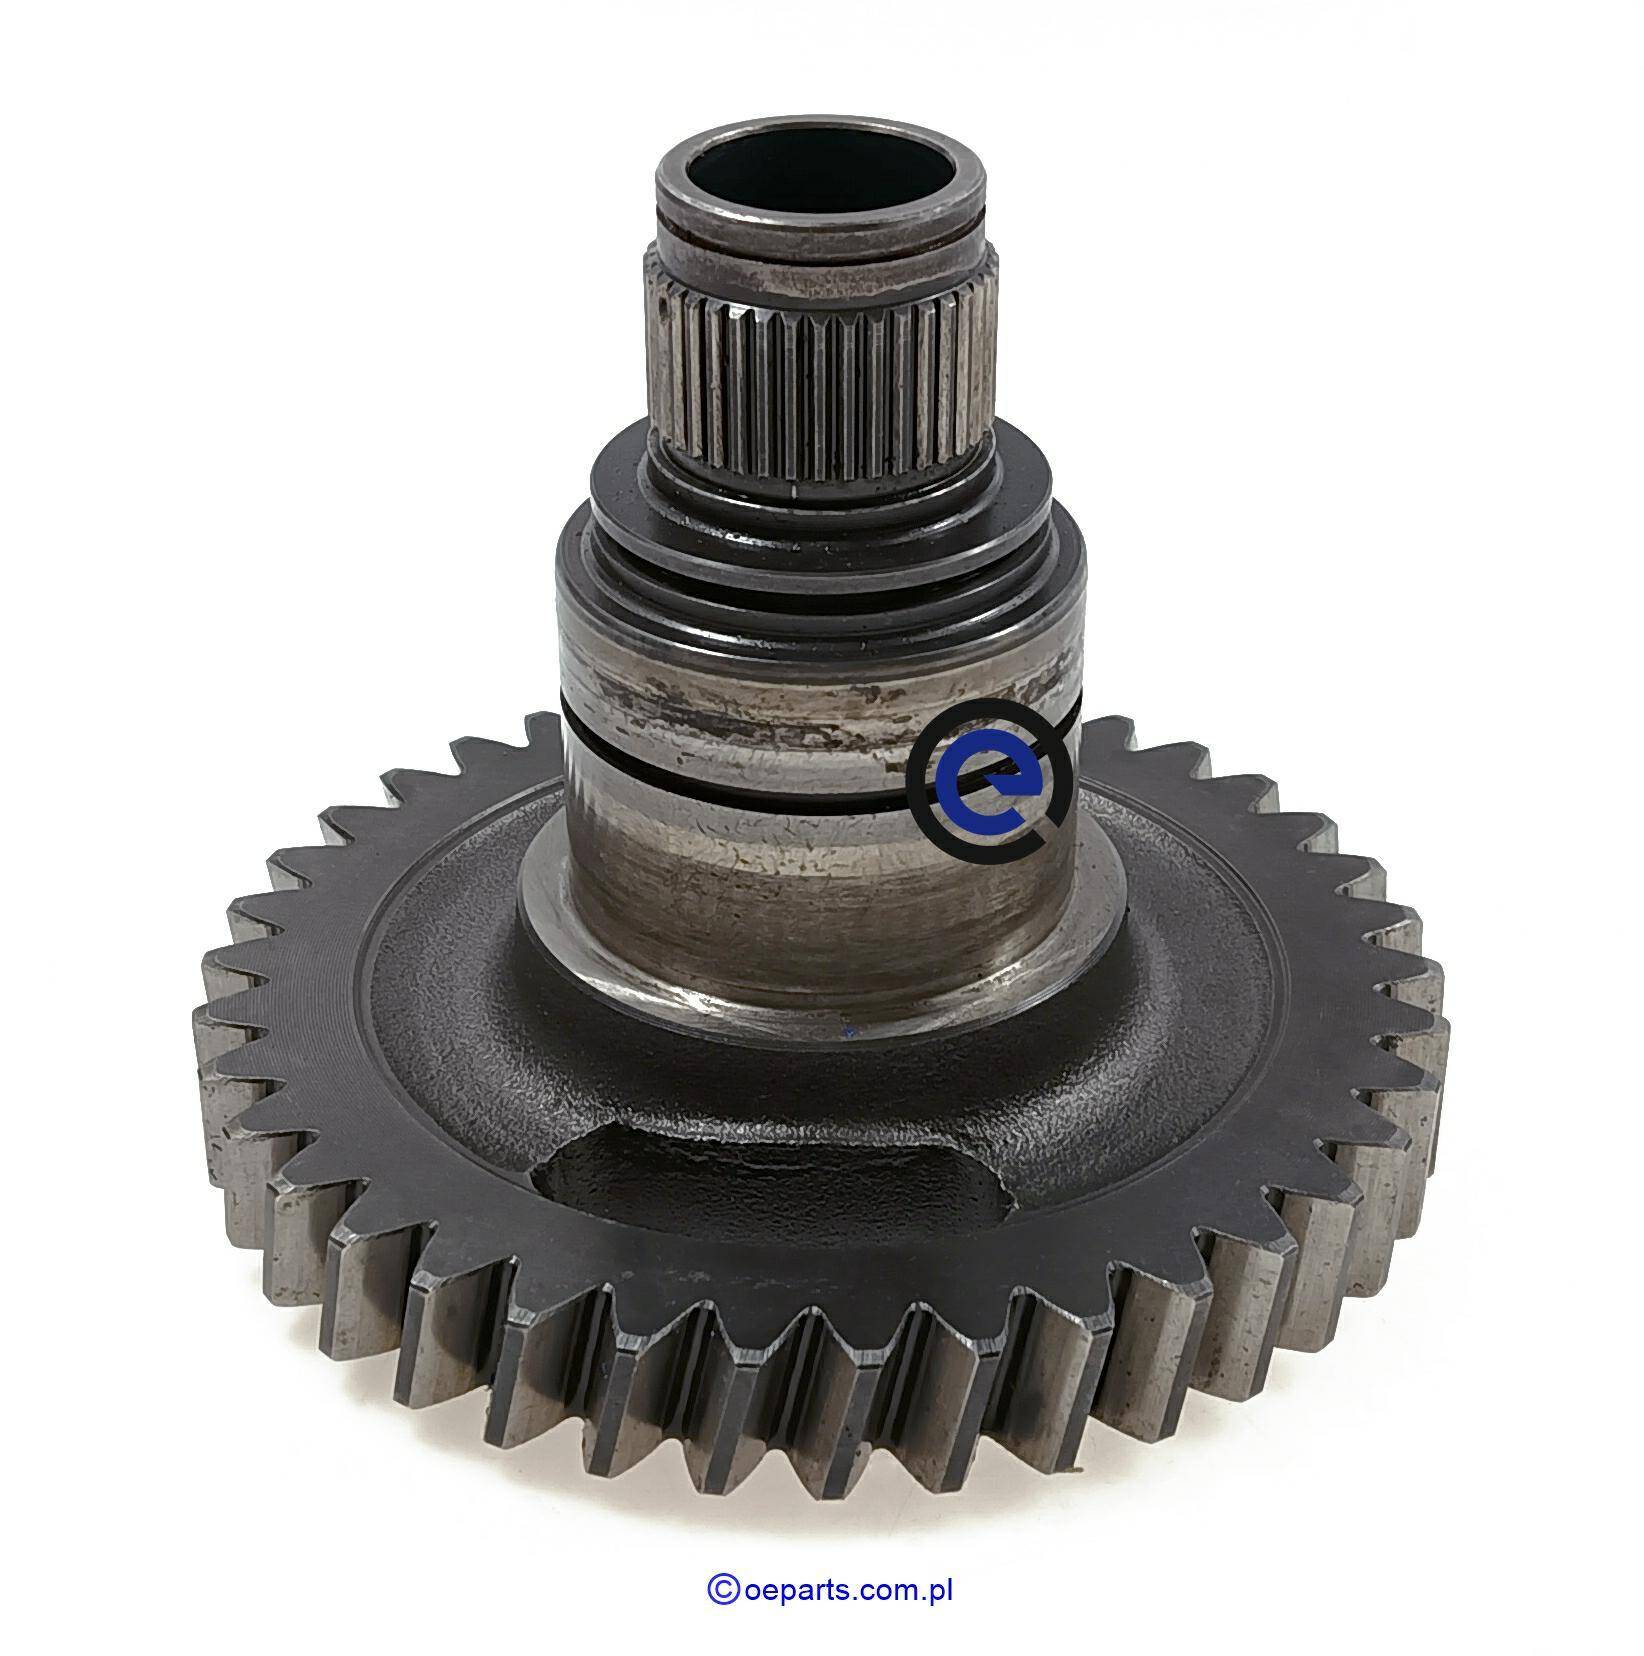 Helical gear 4112333127 OEM ZF (used